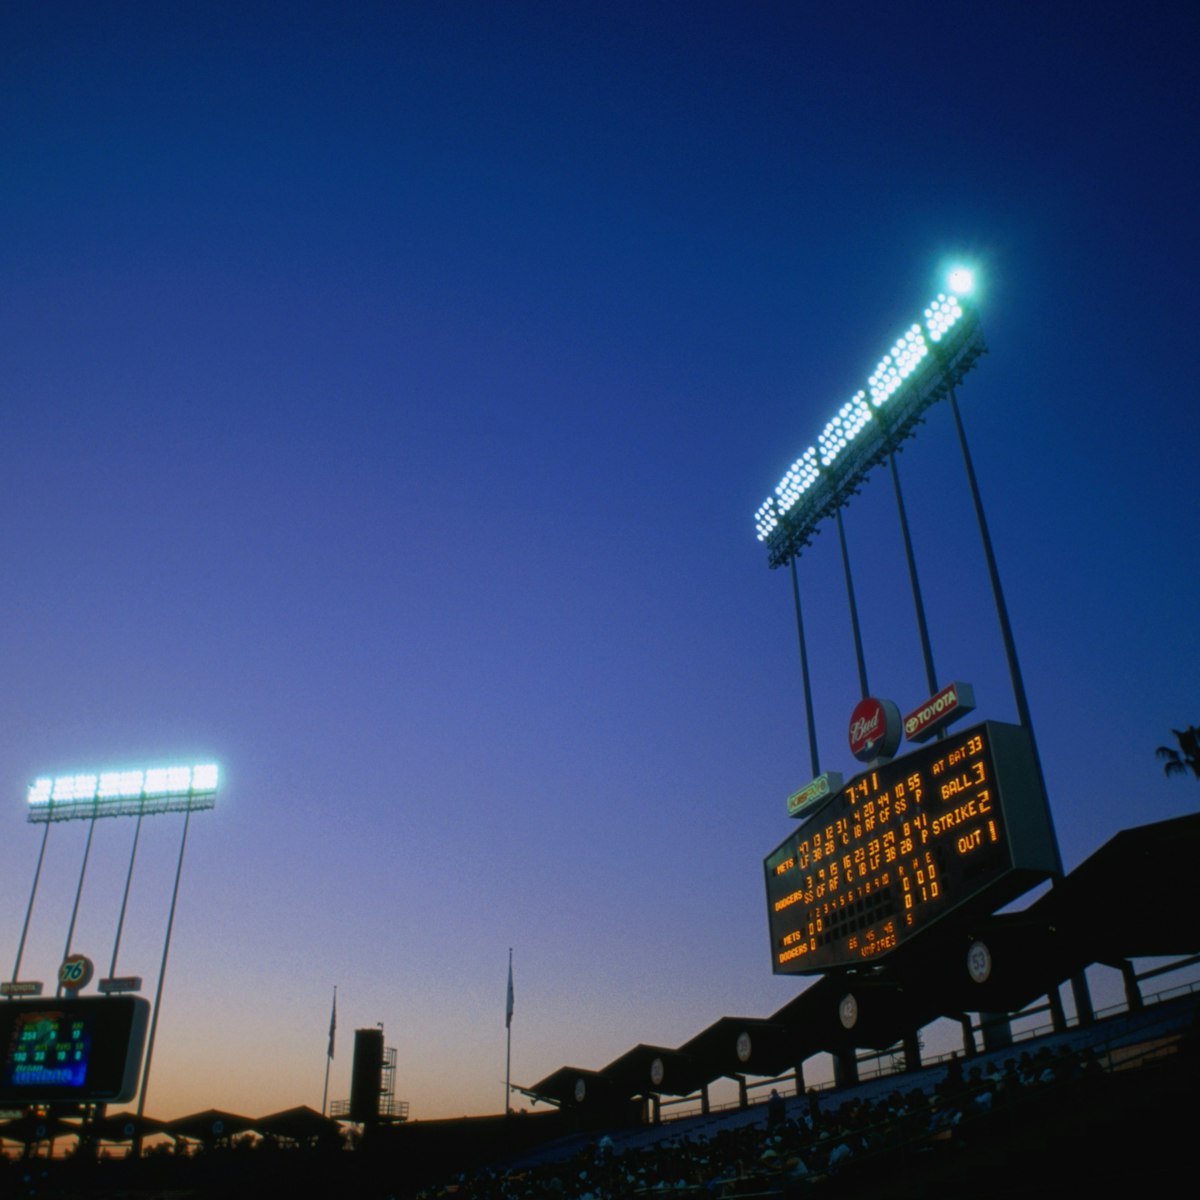 Dodgers Stadium (home of the LA Dodgers) in Los Angeles.